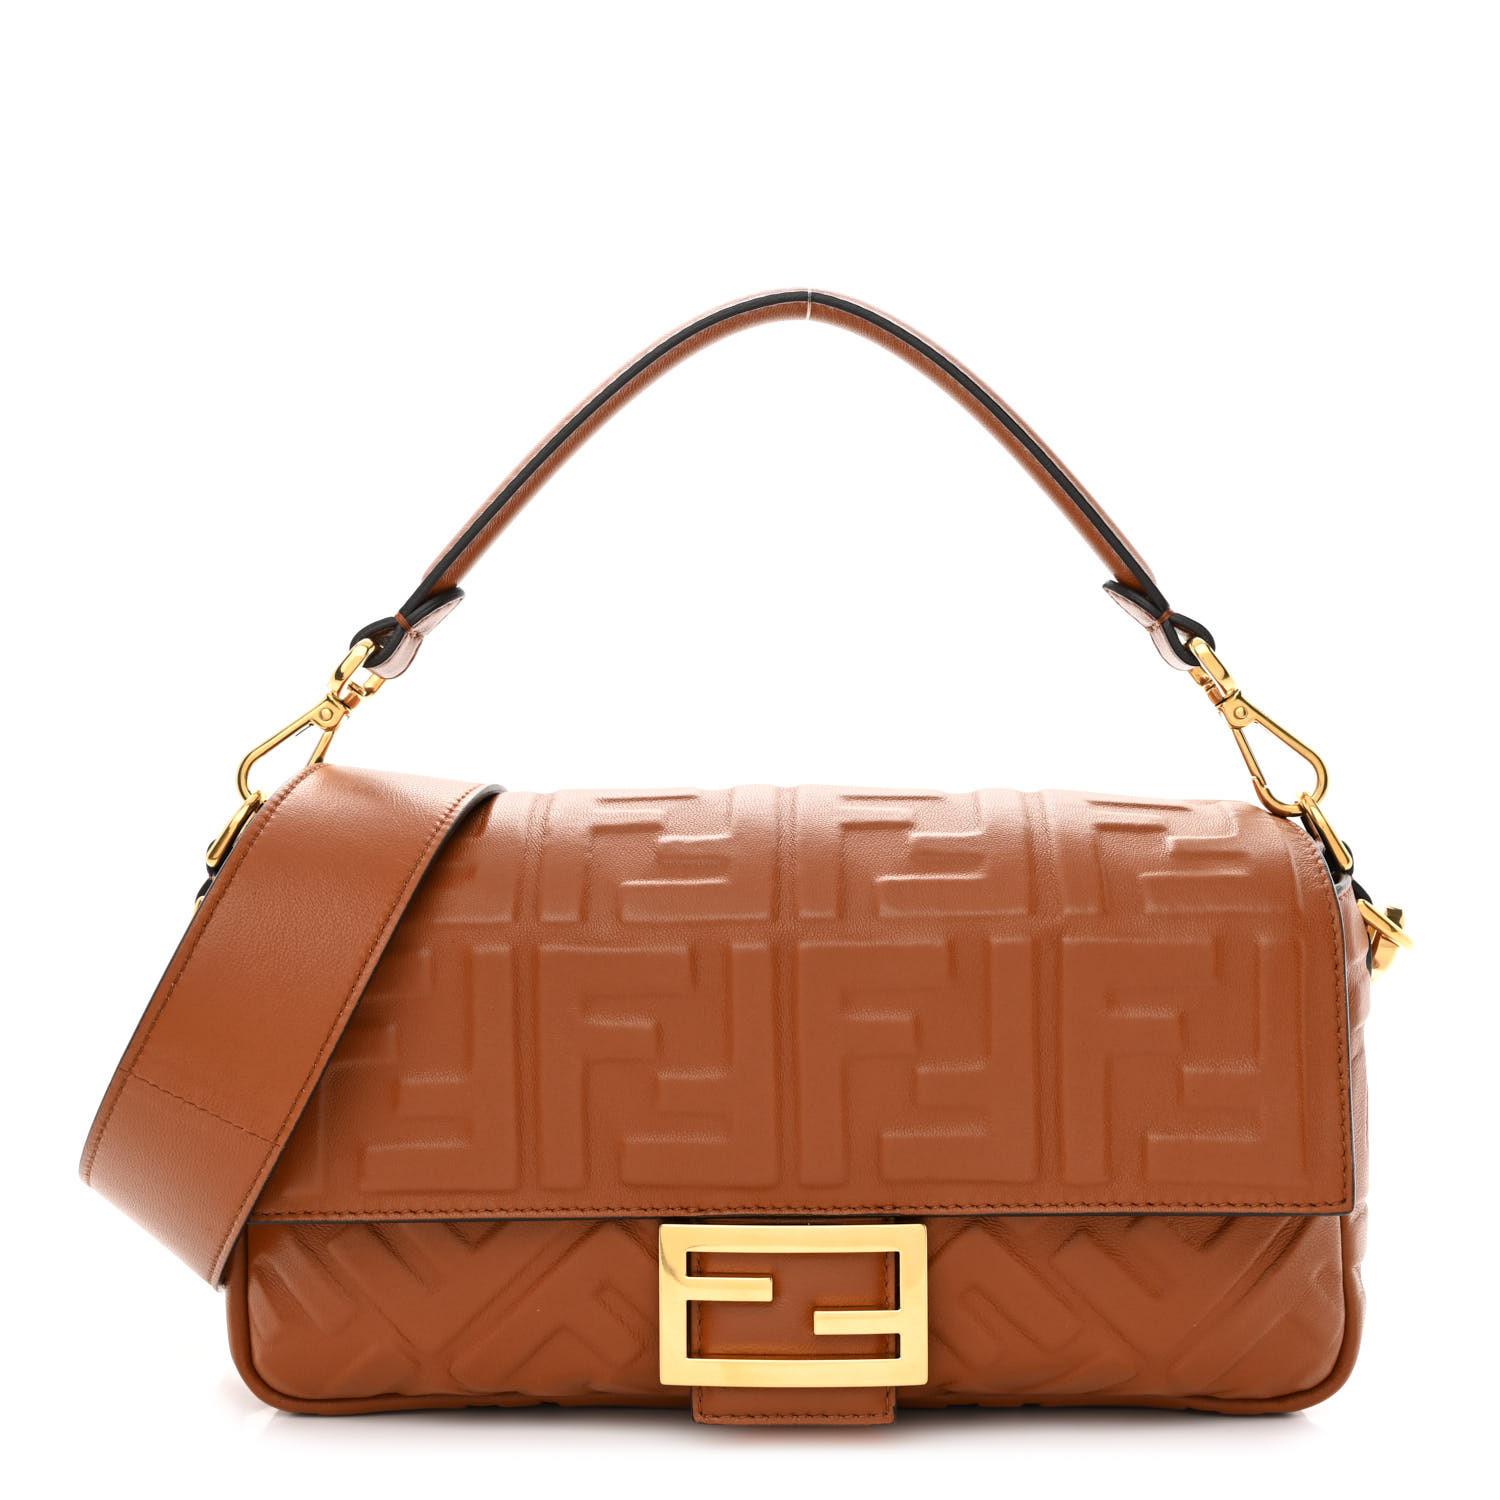 image of FENDI Nappa FF 1974 Embossed Baguette in the color Coloniale by FASHIONPHILE